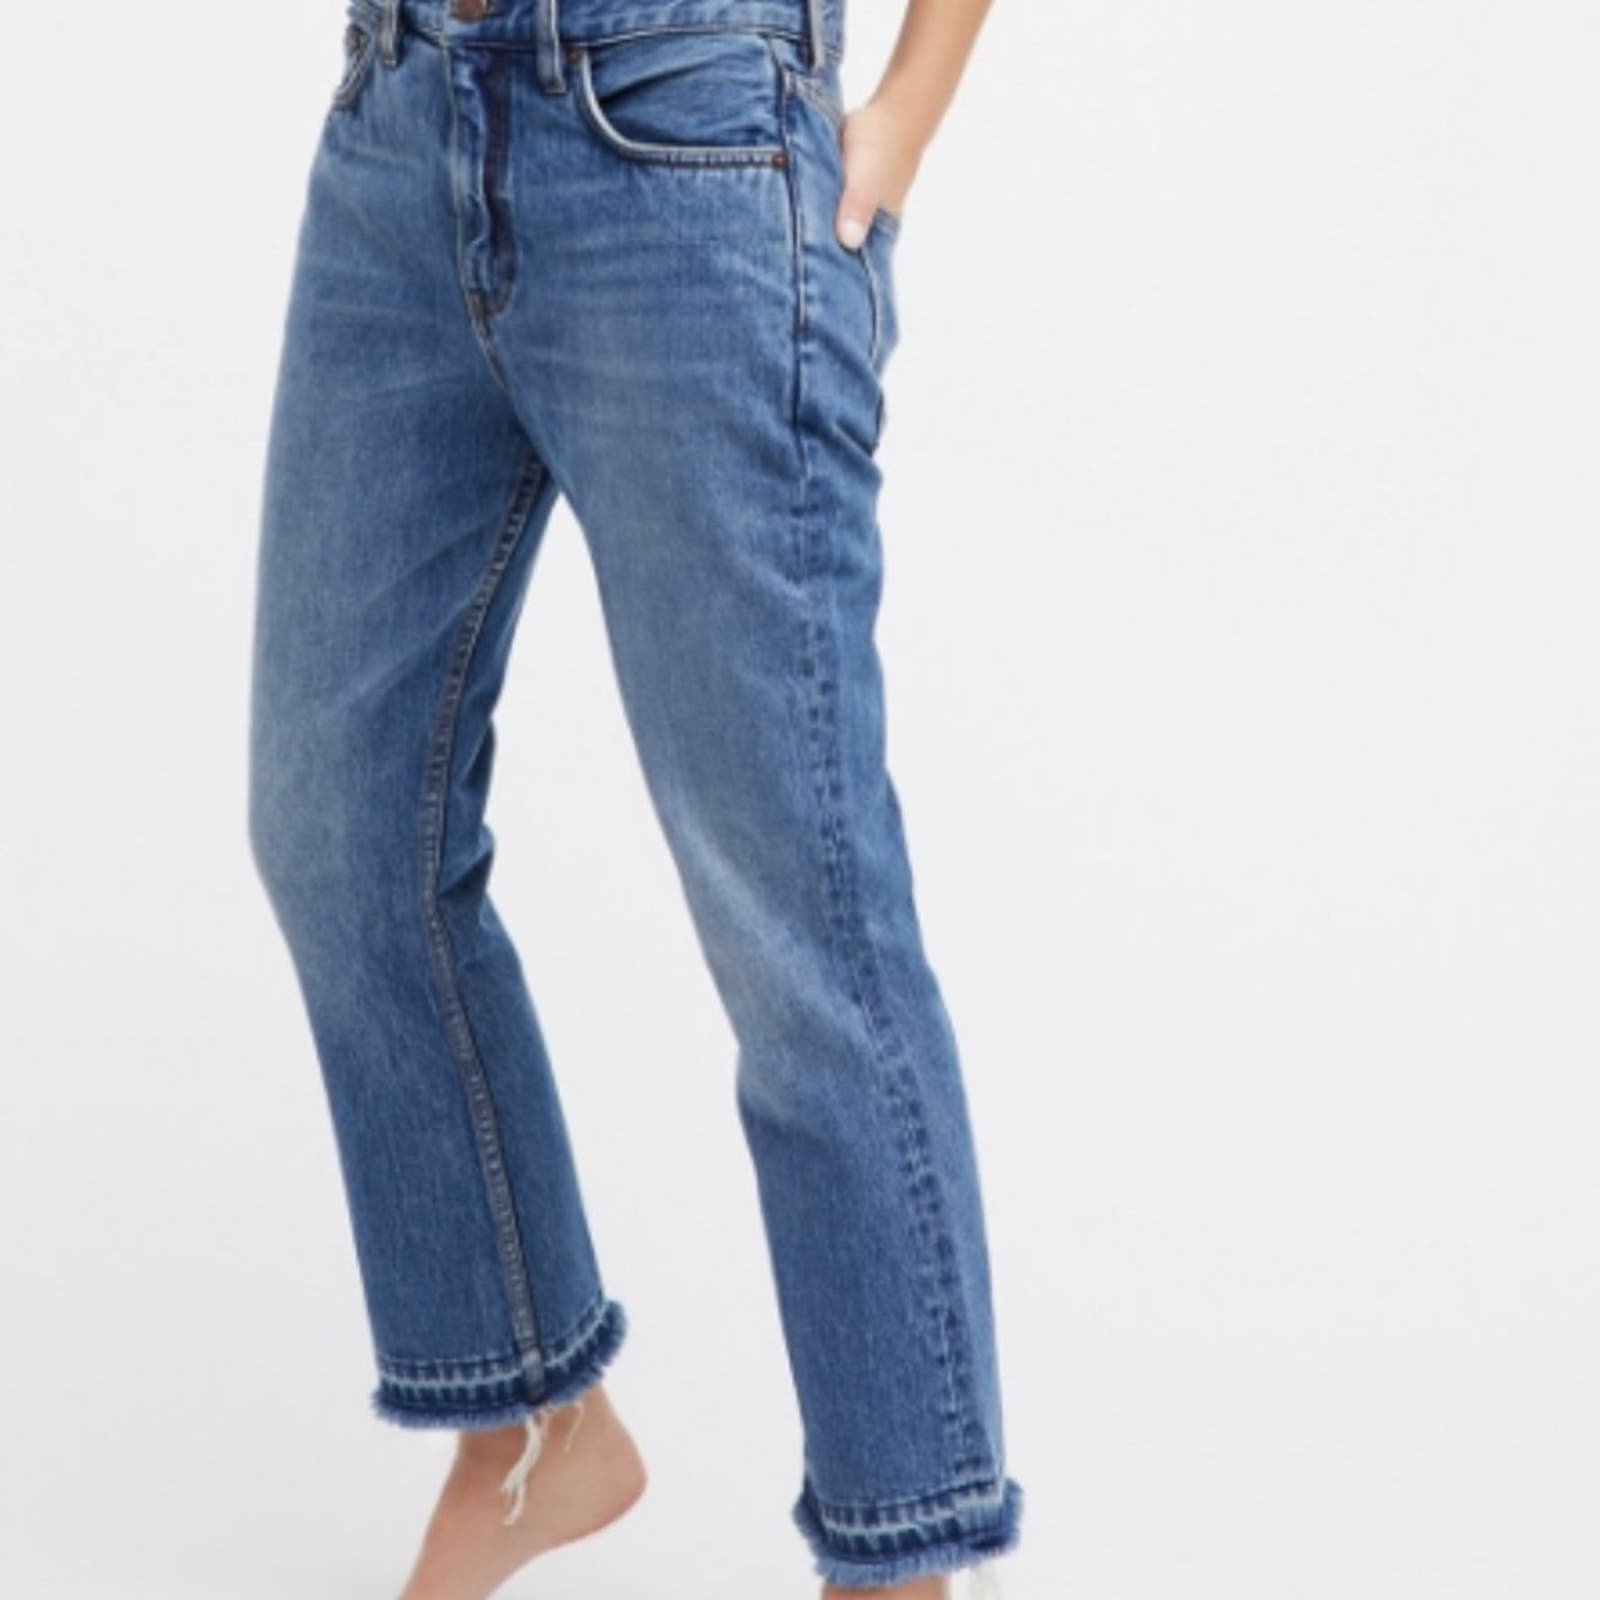 Stylish Free People Cropped Boot Cut Jeans  26 ojudGd9fU Online Shop